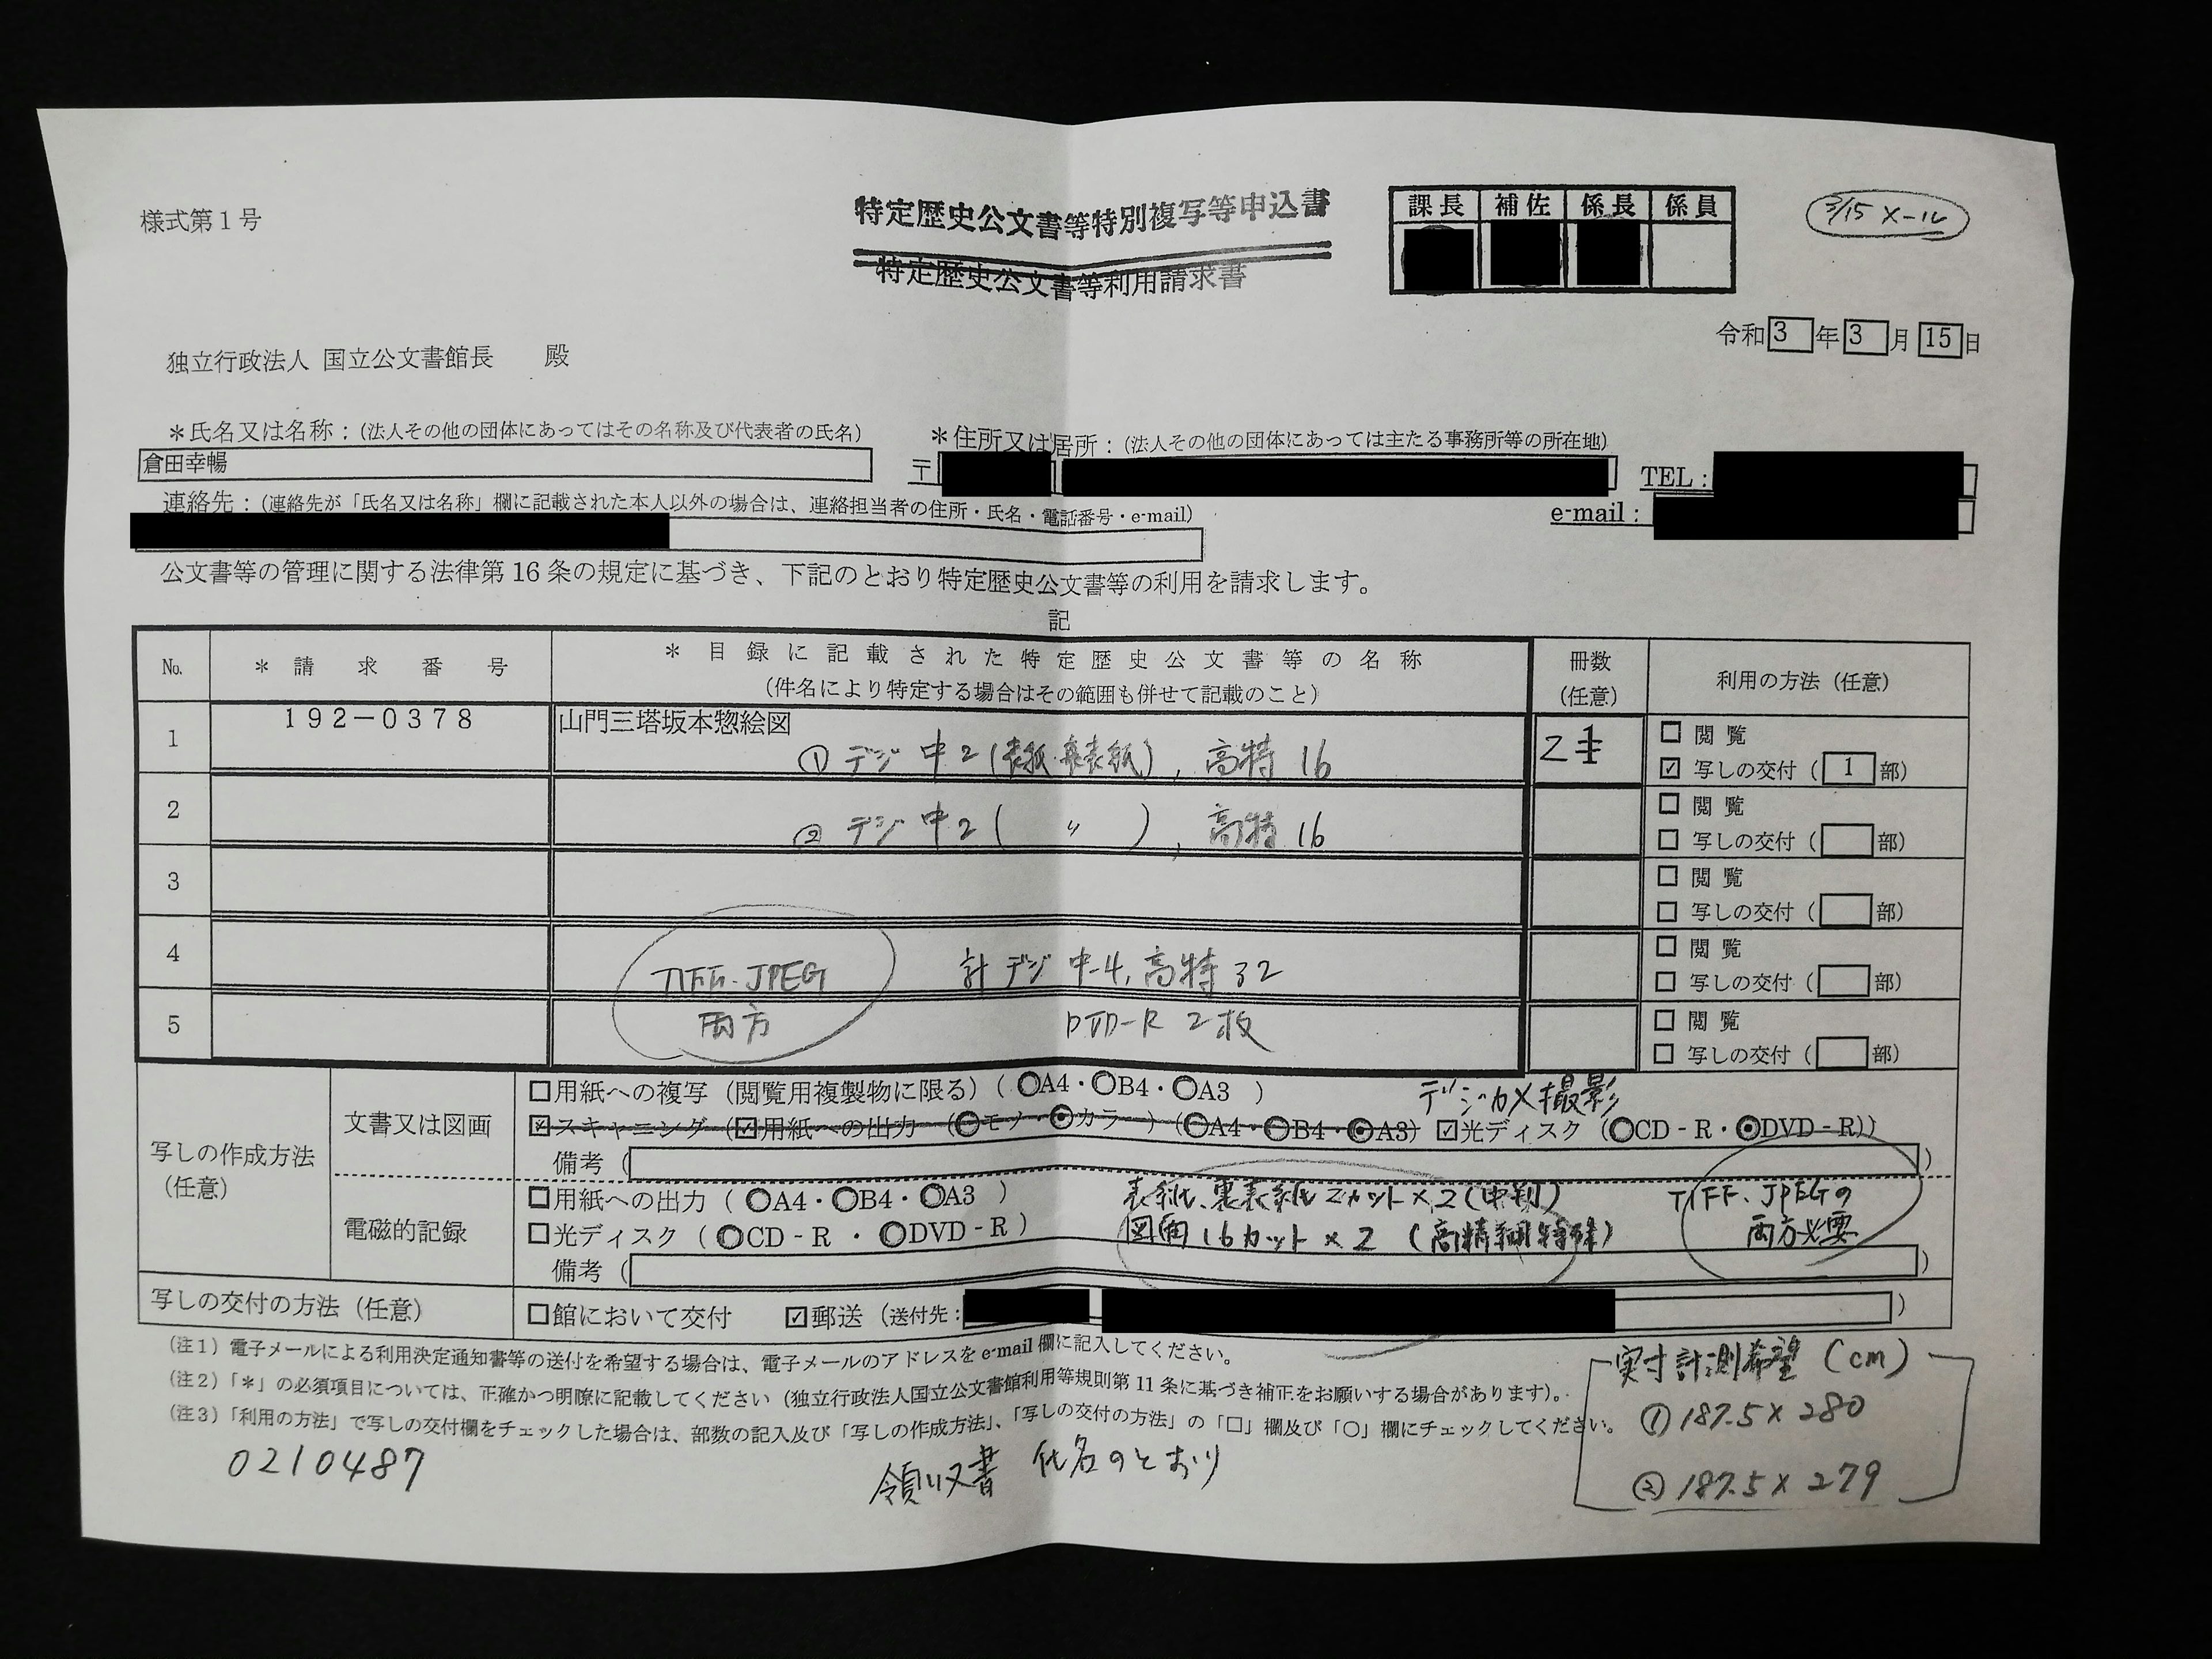 Application form for special copying of historical documents (I submitted it to the National Archives of Japan.)